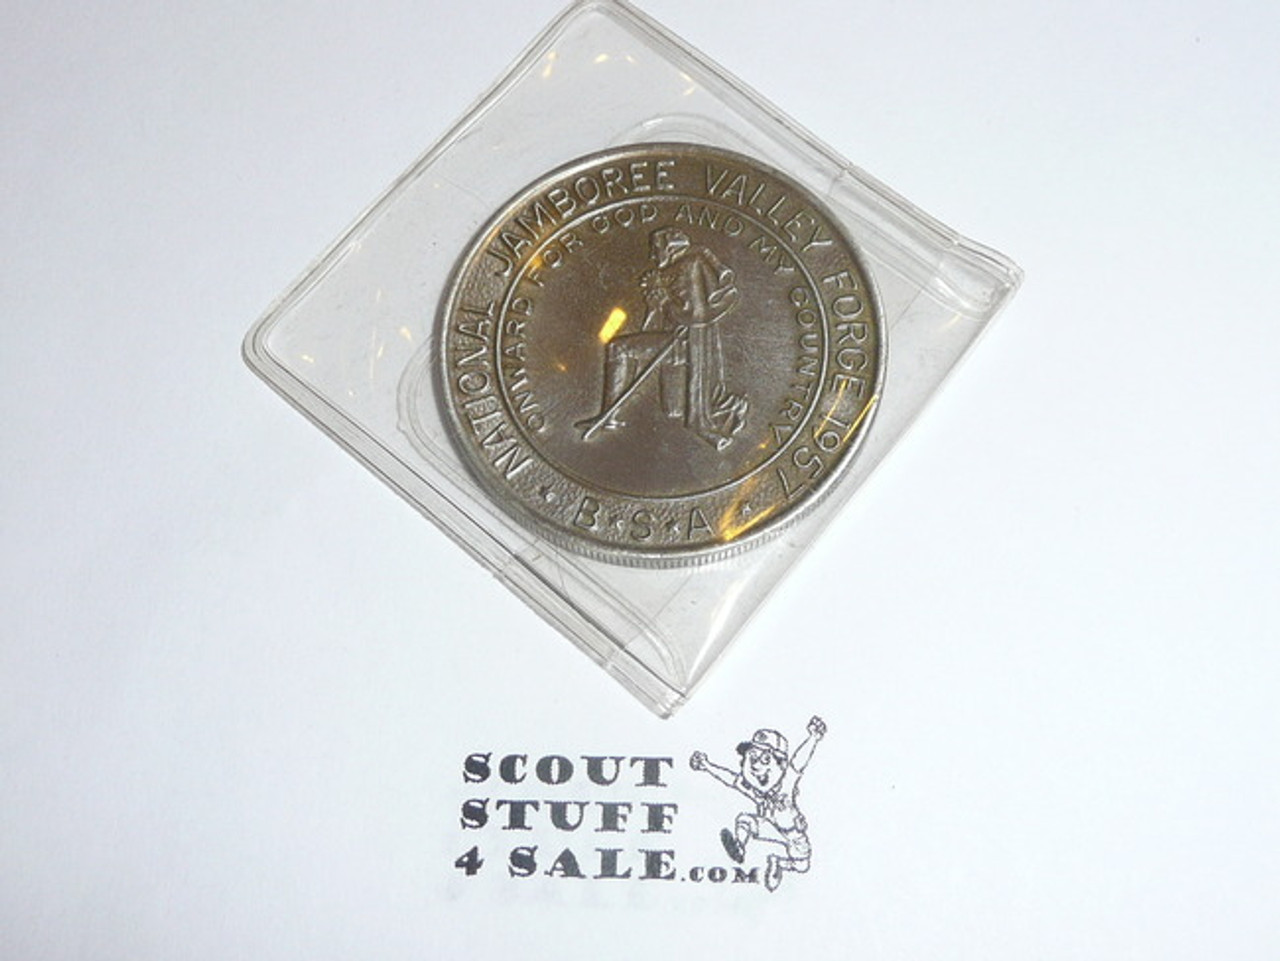 1957 National Jamboree Coin / Token, Pewter Color